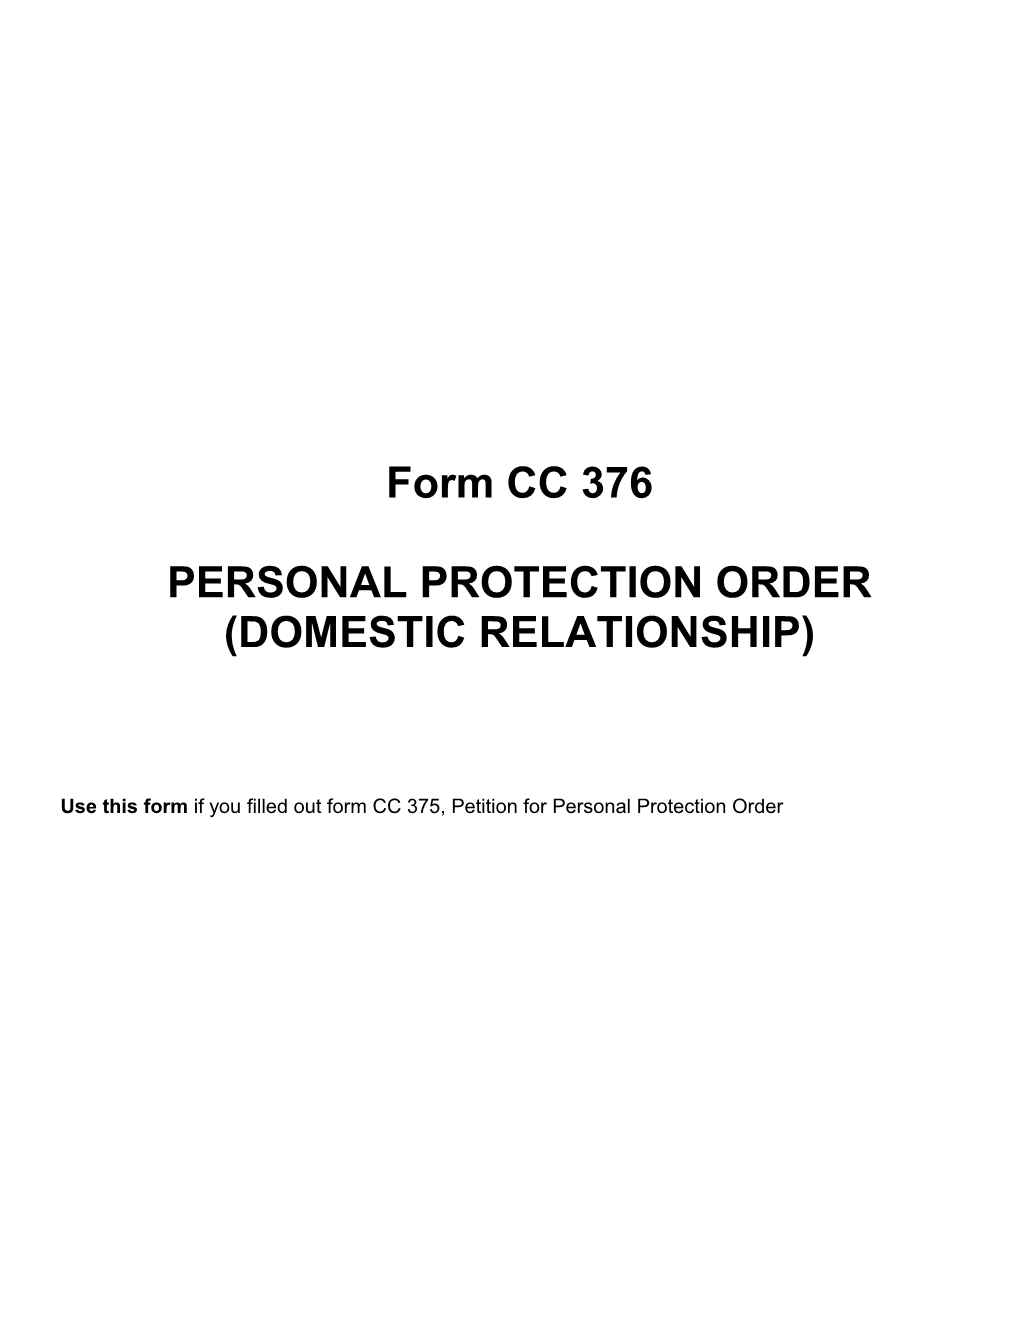 Personal Protection Order (Domestic Relationship)